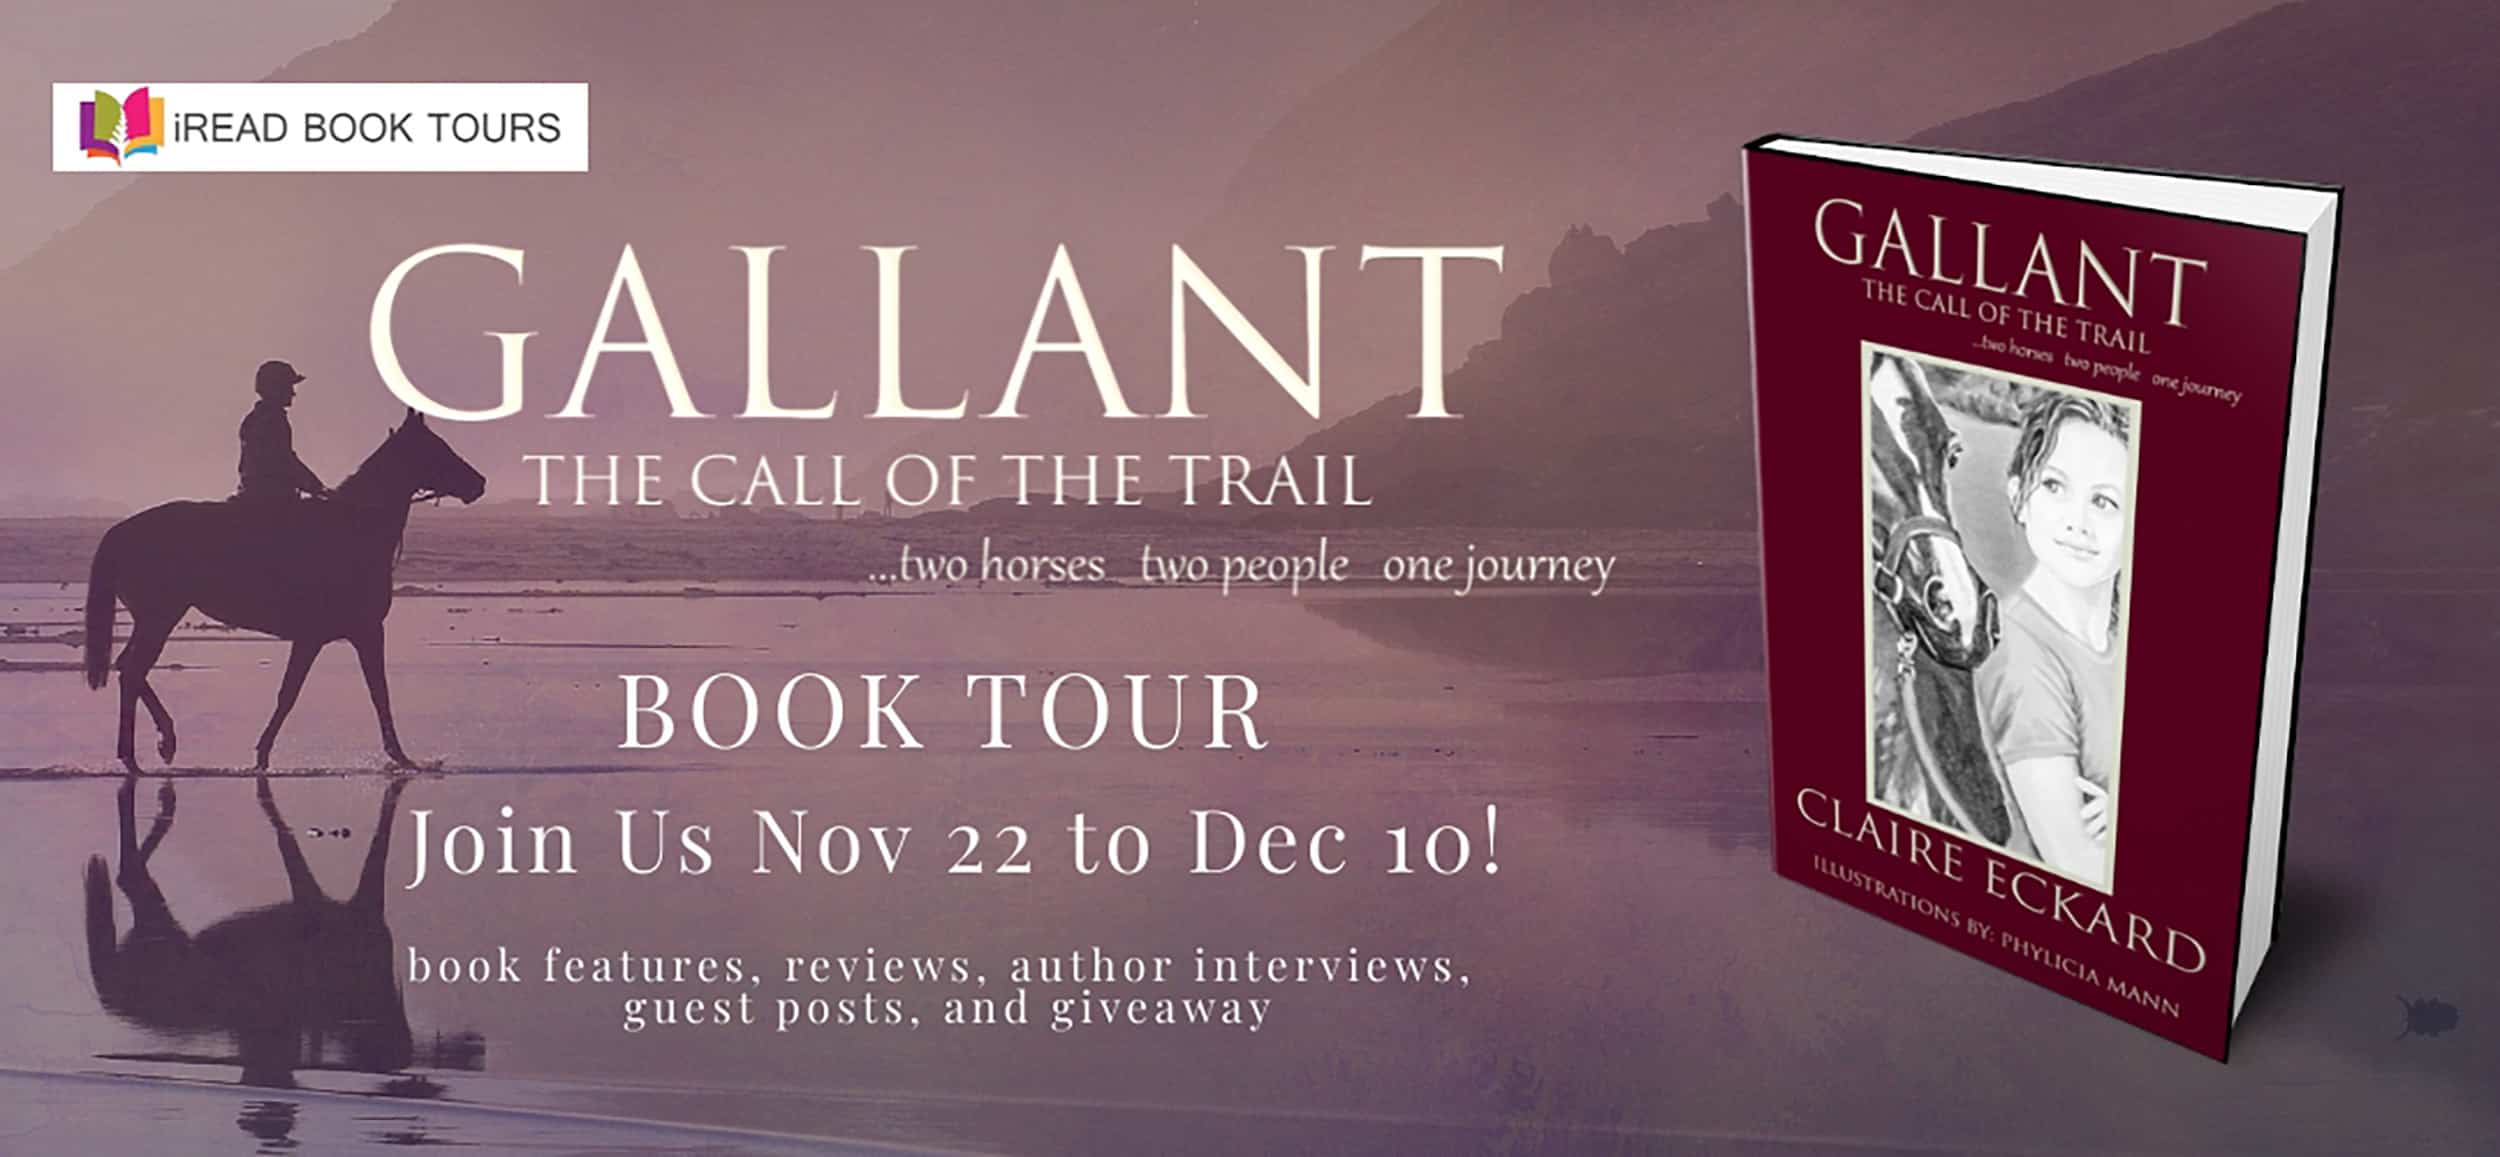 Gallant: The Call of the Trail by Claire Eckard | Spotlight, Giveaway (1 Winner), Interview